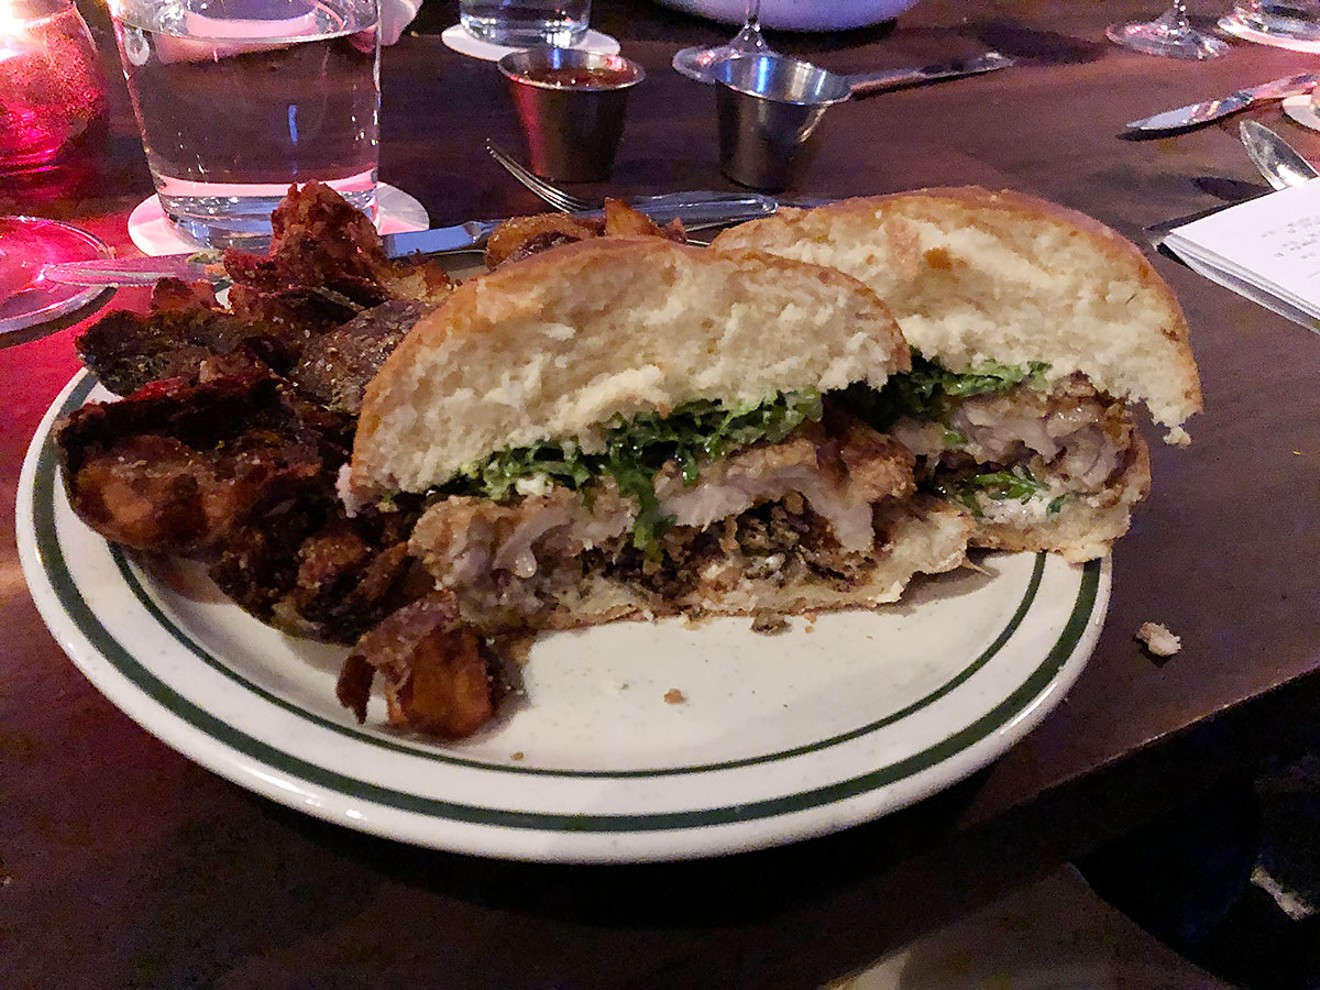 The Buttermilk Fried Chicken Sandwich at Night Heron will make you toss your diet out the window...for a few minutes anyway.